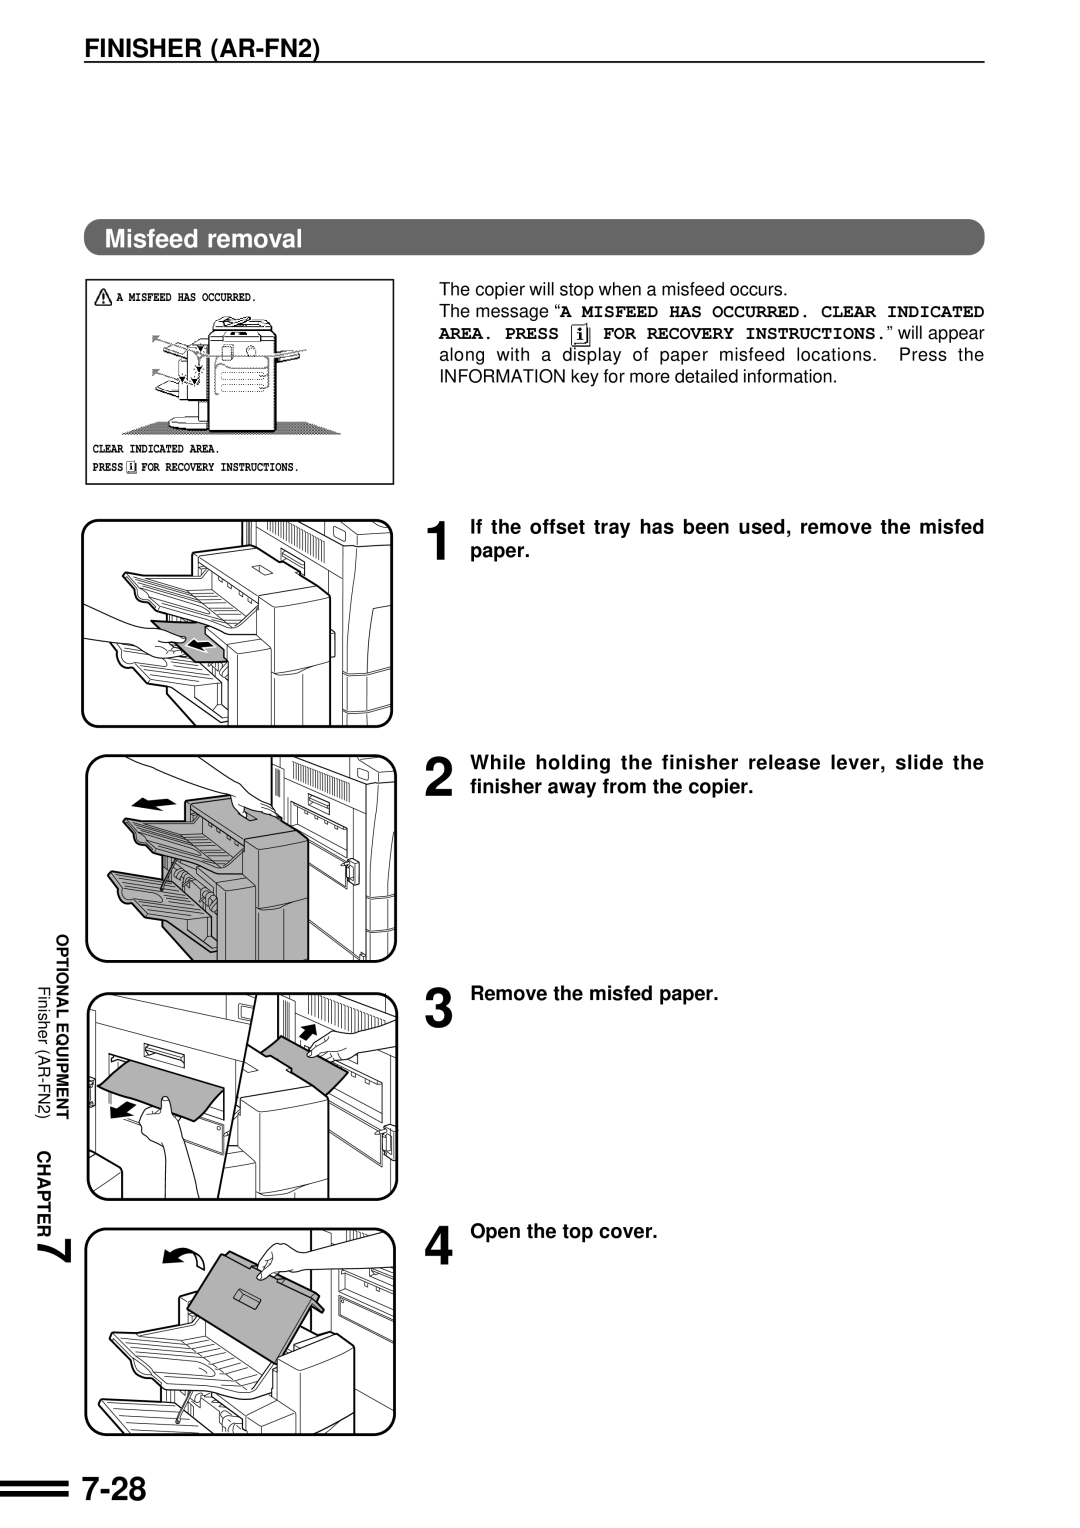 Sharp AR-287 manual 7-28, Misfeed removal, If the offset tray has been used, remove the misfed paper 